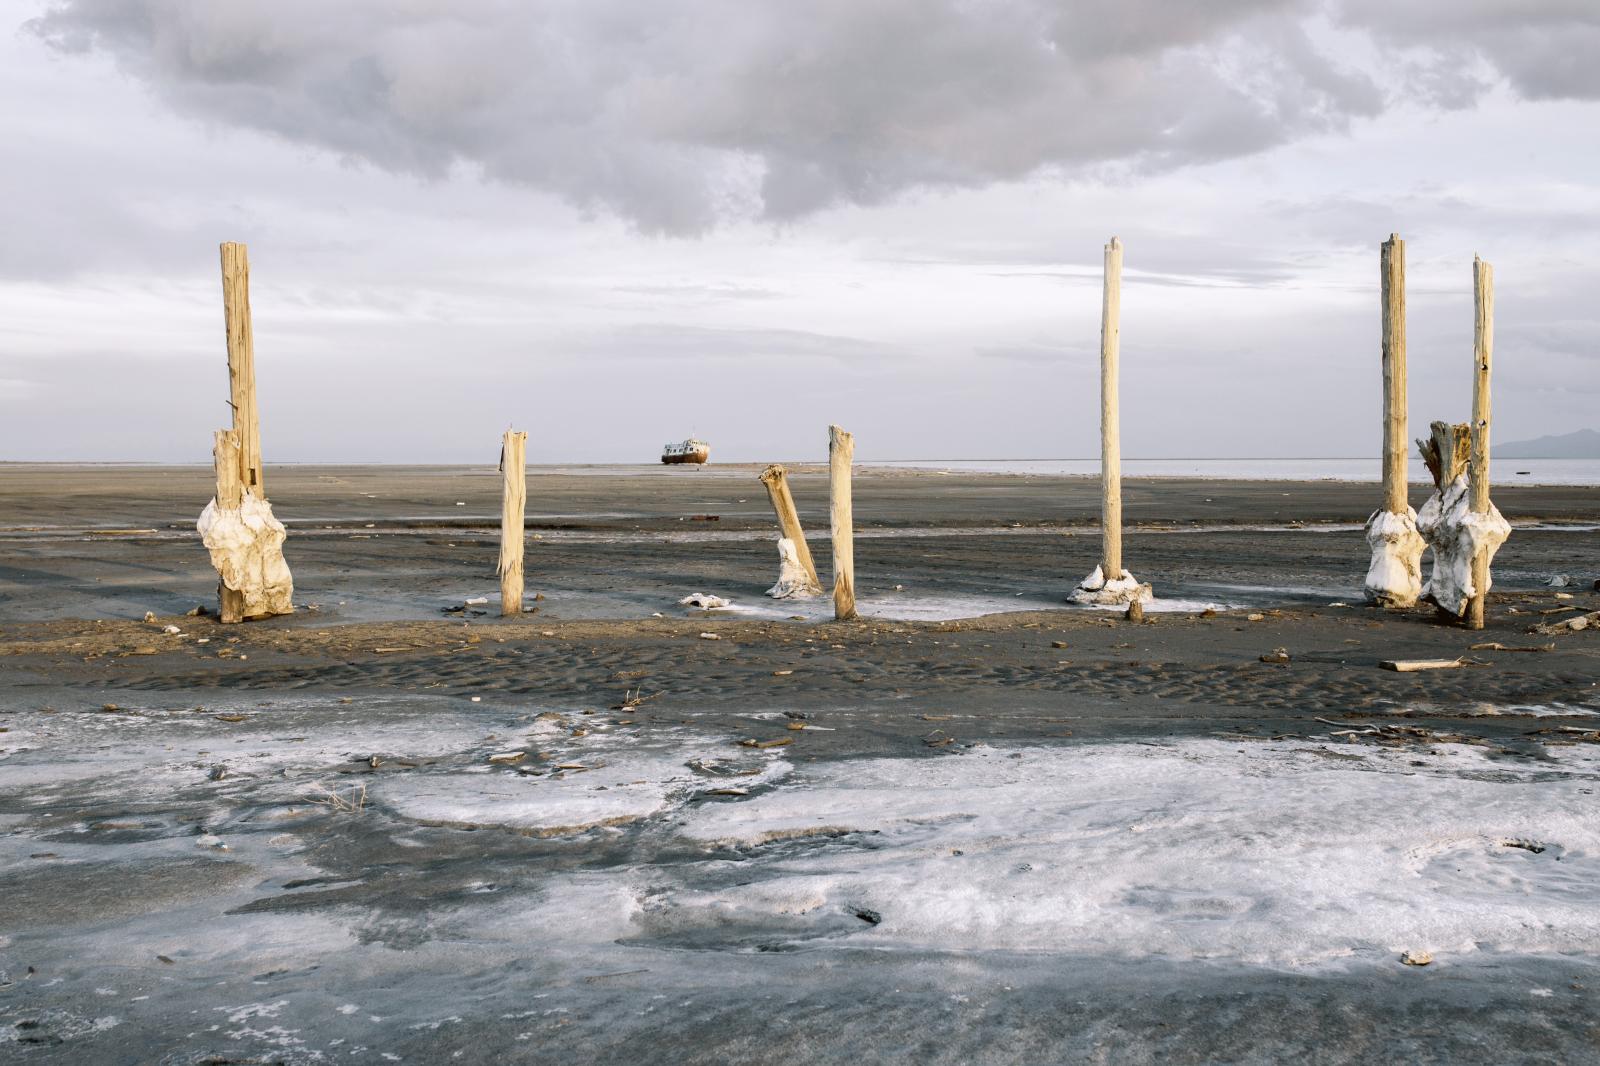 Lake Urmia: Iran’s most famous lake is disappearing! | Buy this image